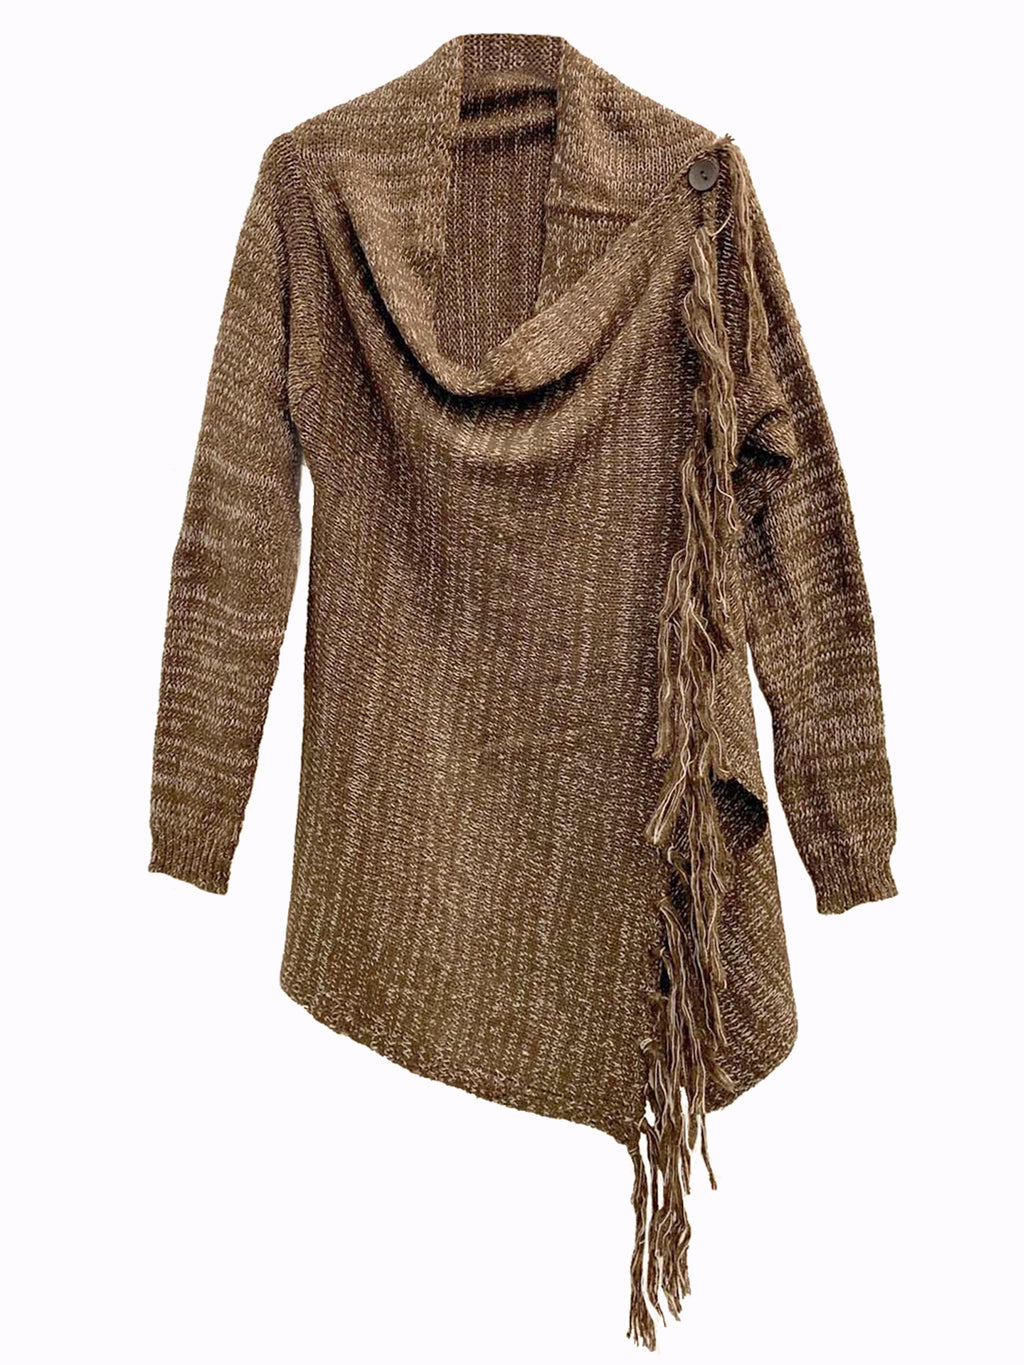 Asymmetrical Draped Knit Sweater With Fringe